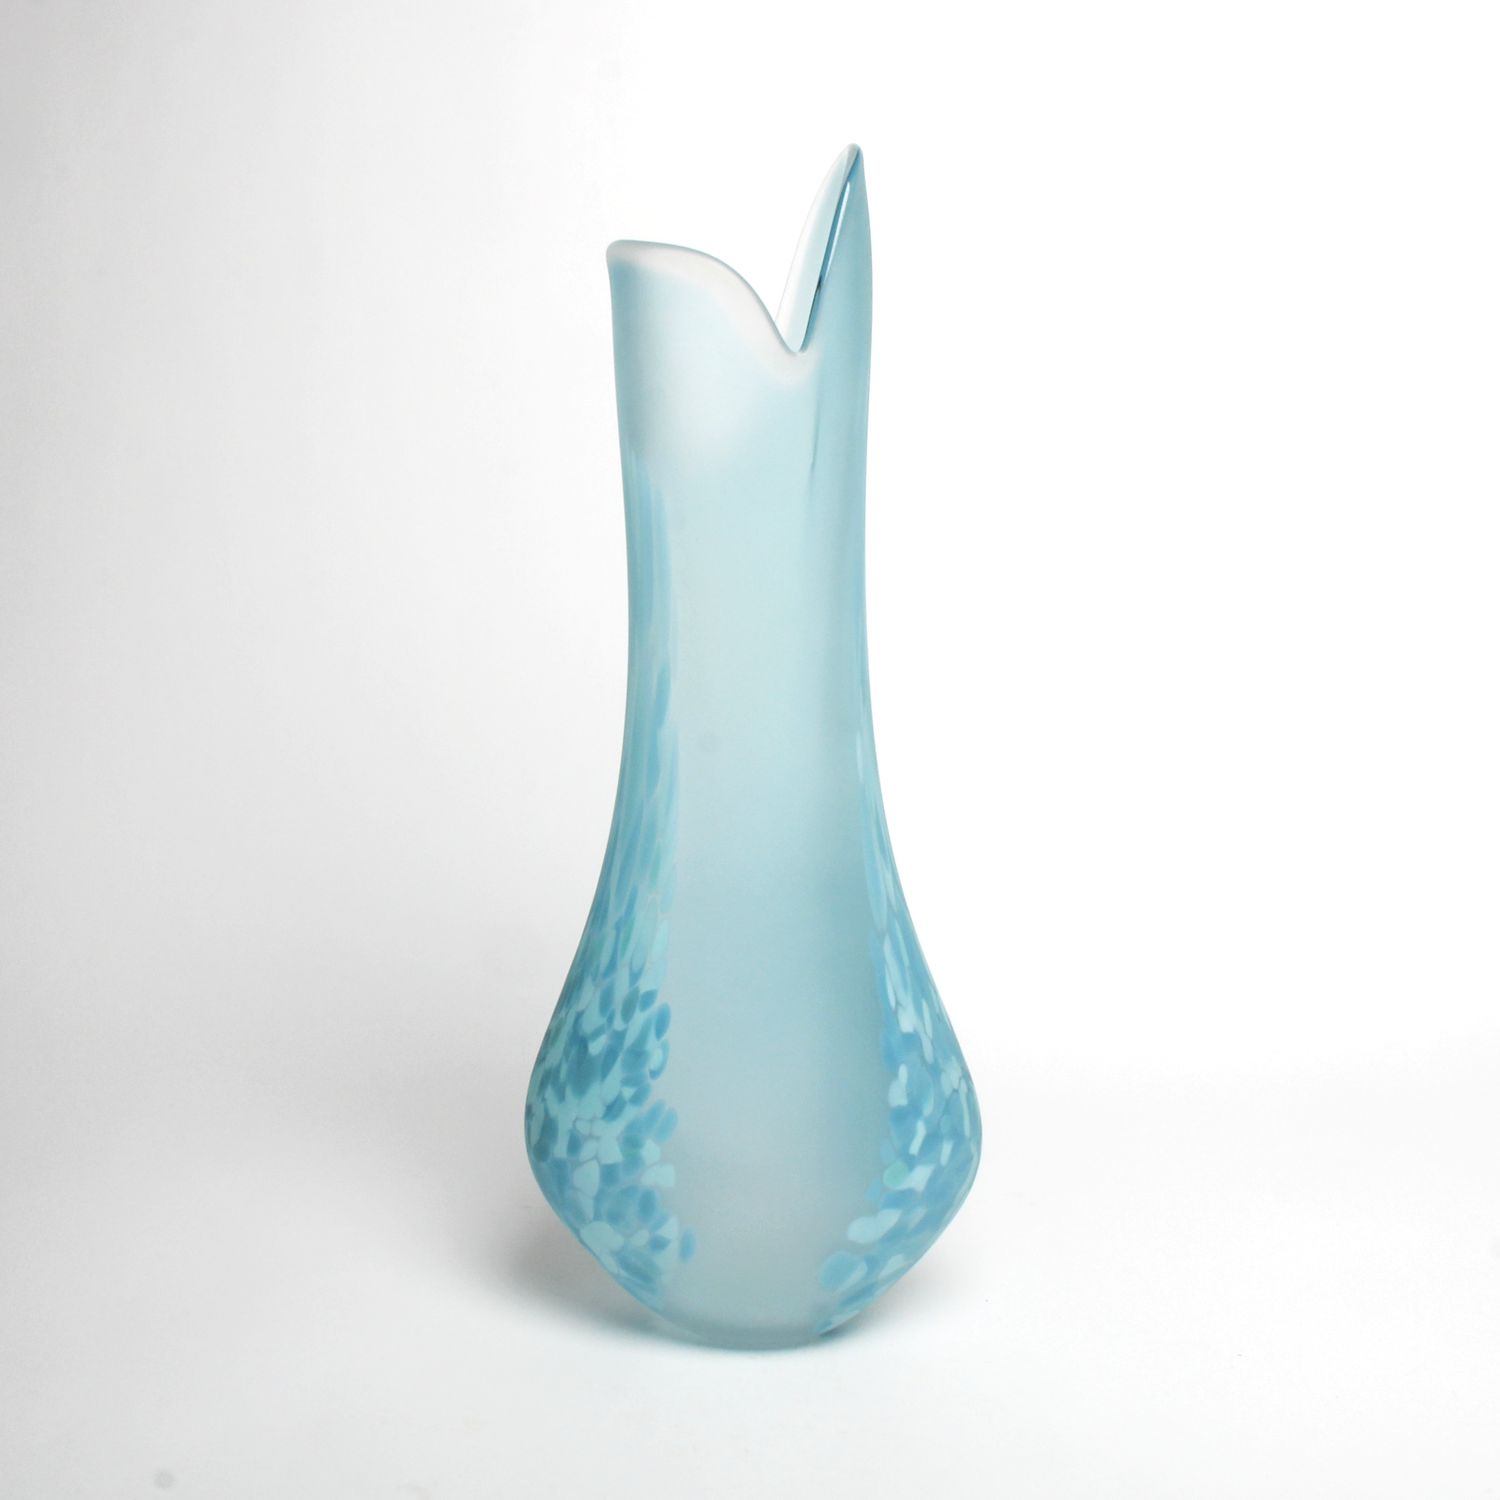 A&M Waddell Hunter: Large Flava Vase Product Image 4 of 6